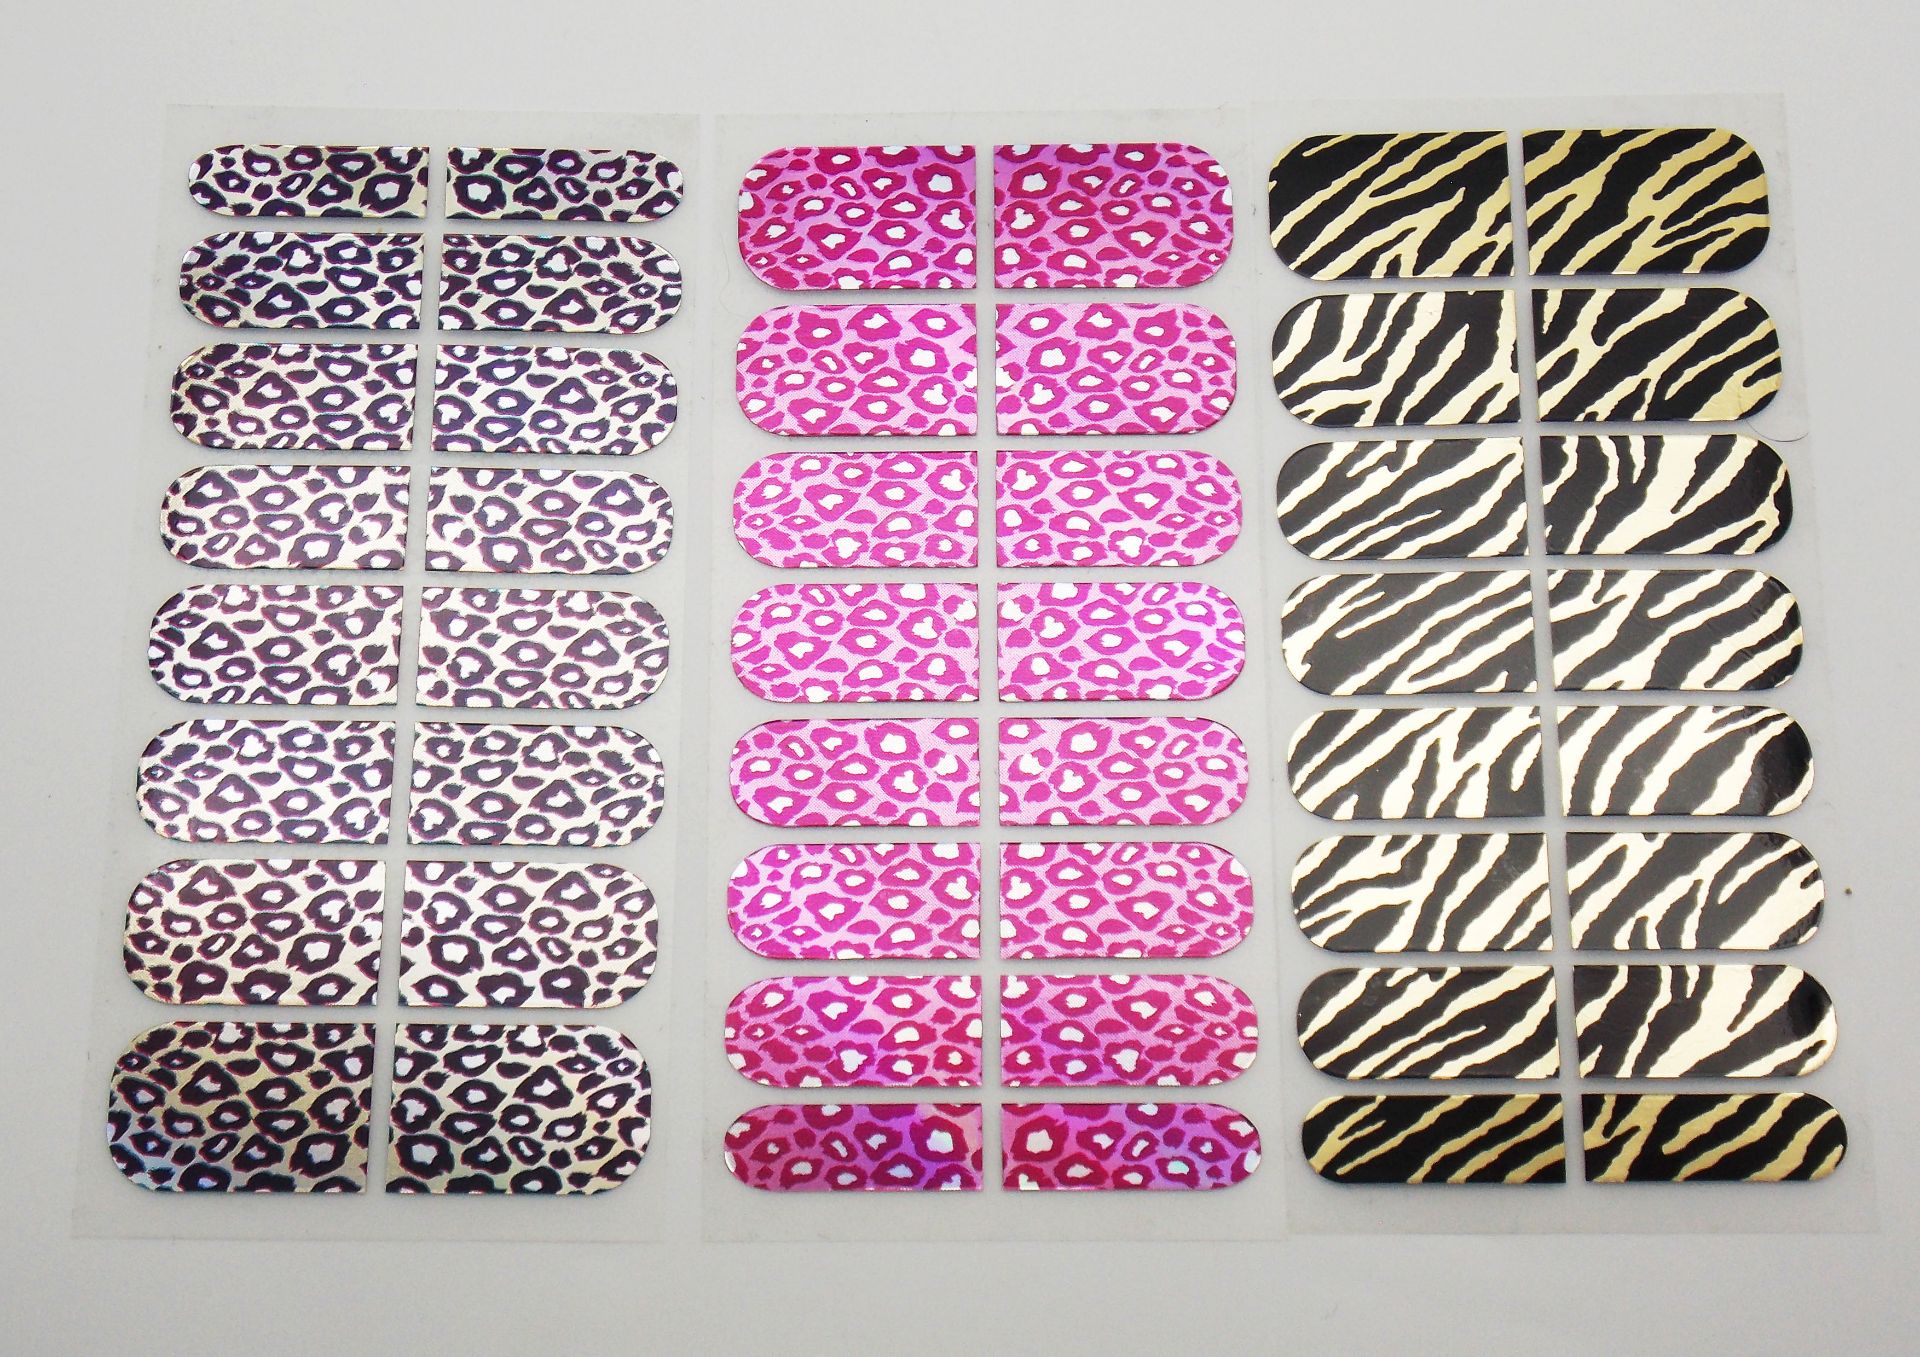 144 Packs Of Professional Nail Art Wrap Transfers - 3 Different Animal Print Styles - Image 2 of 10